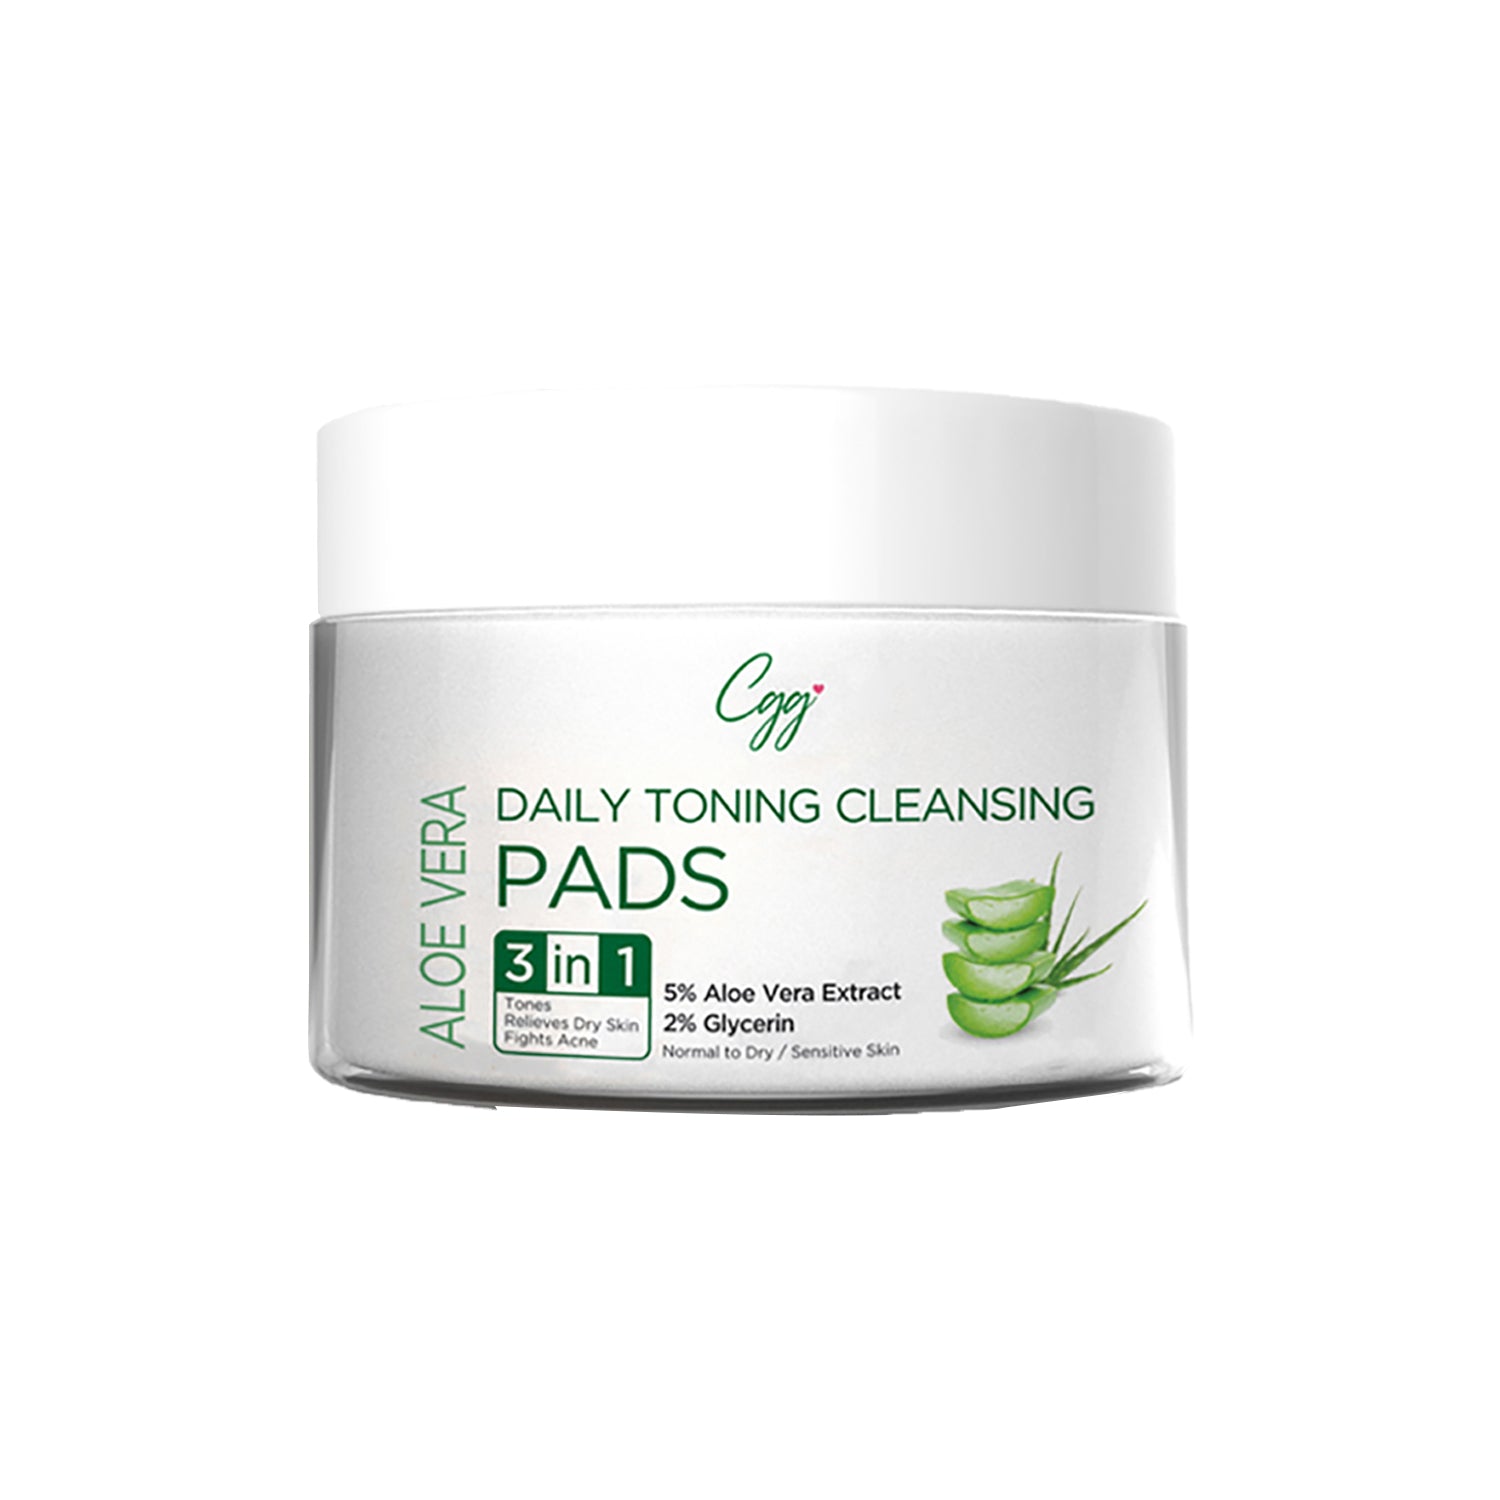 CGG Cosmetics Aloe Vera Daily Toning Cleansing Pads | 3-In-1 Tones, Relieves Dry Skin & Fights Acne - 50pads